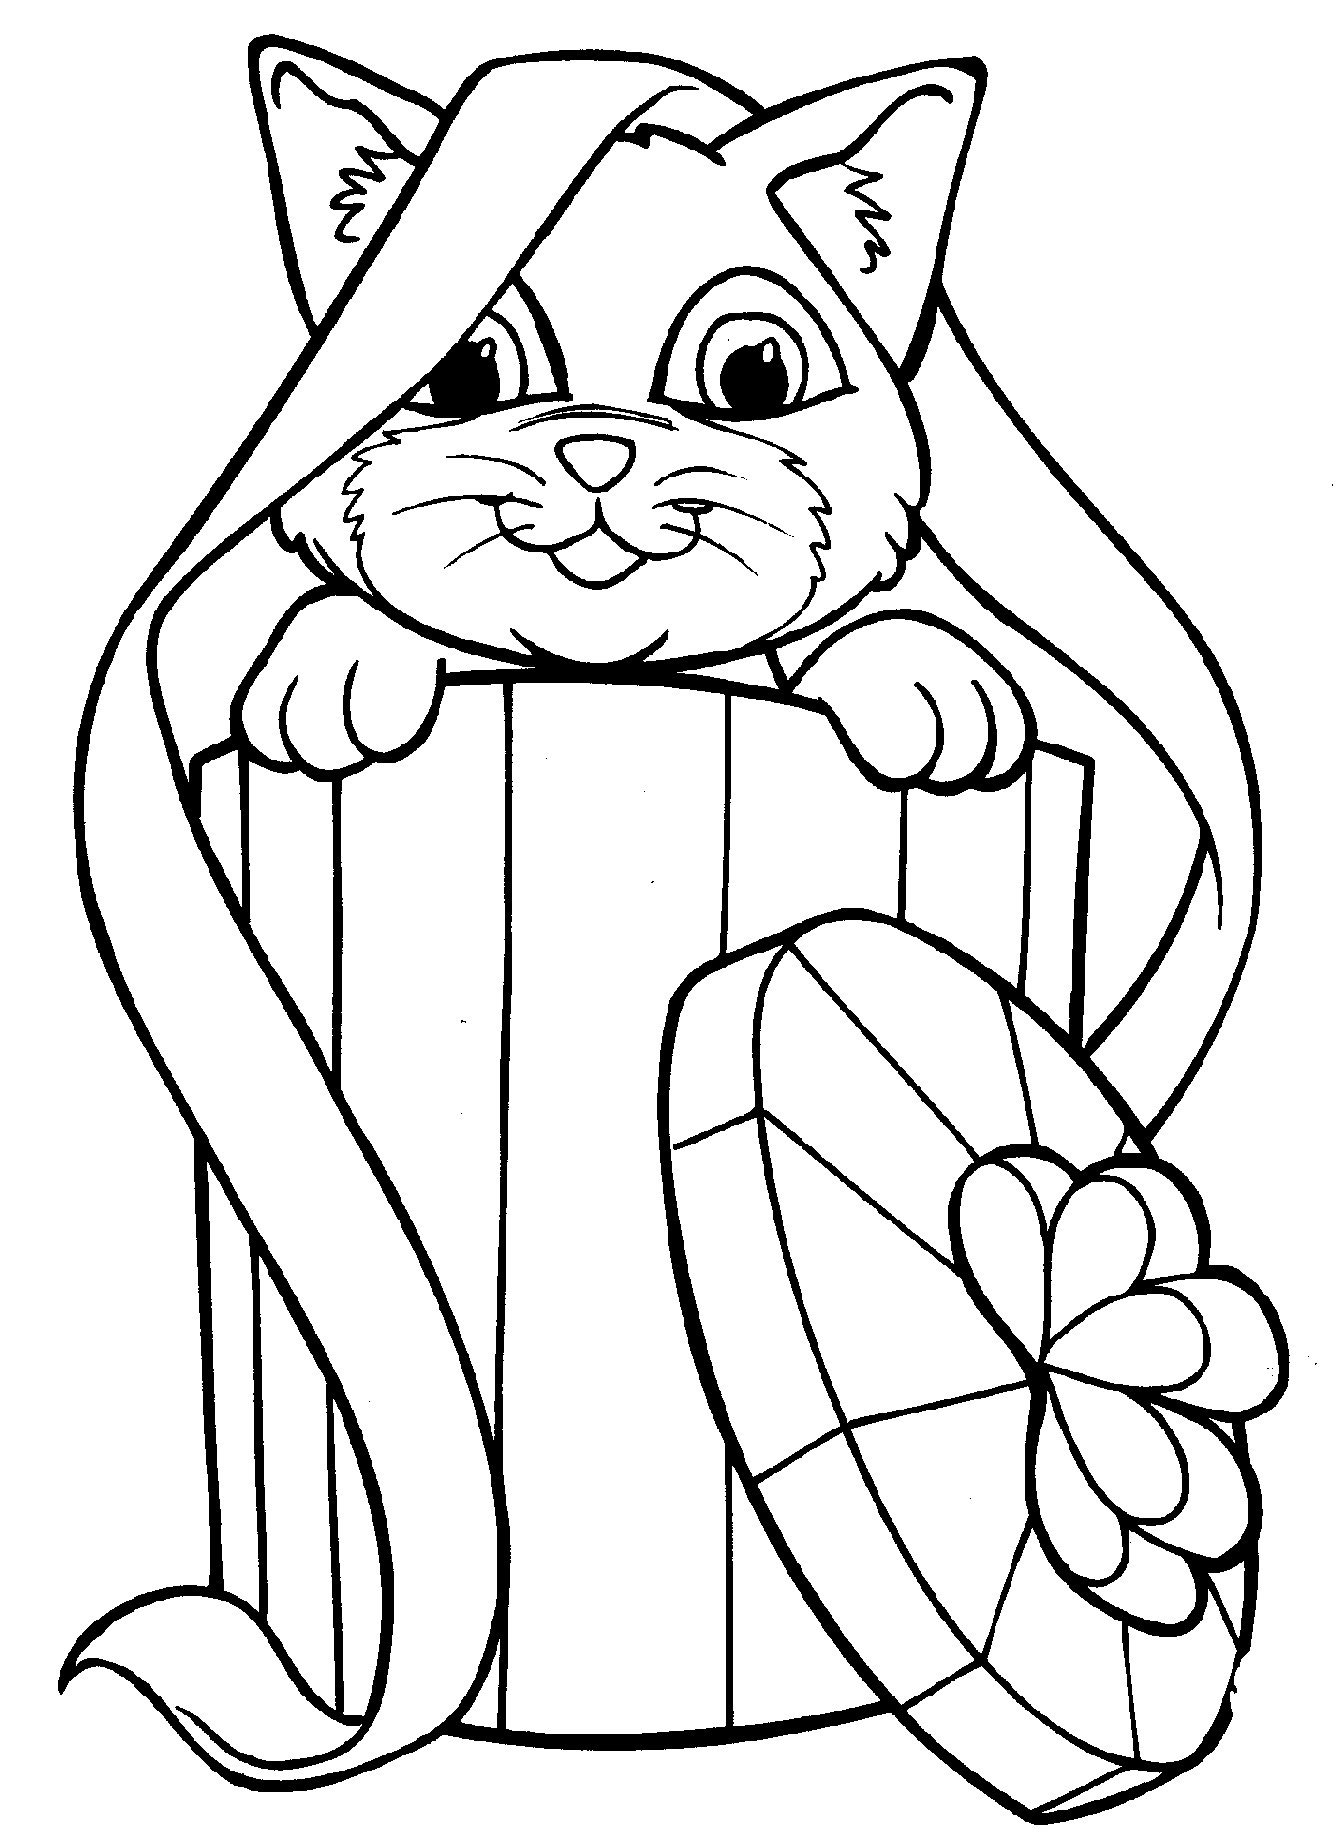 Fun Coloring Sheets For Kids
 Free Printable Kitten Coloring Pages For Kids Best